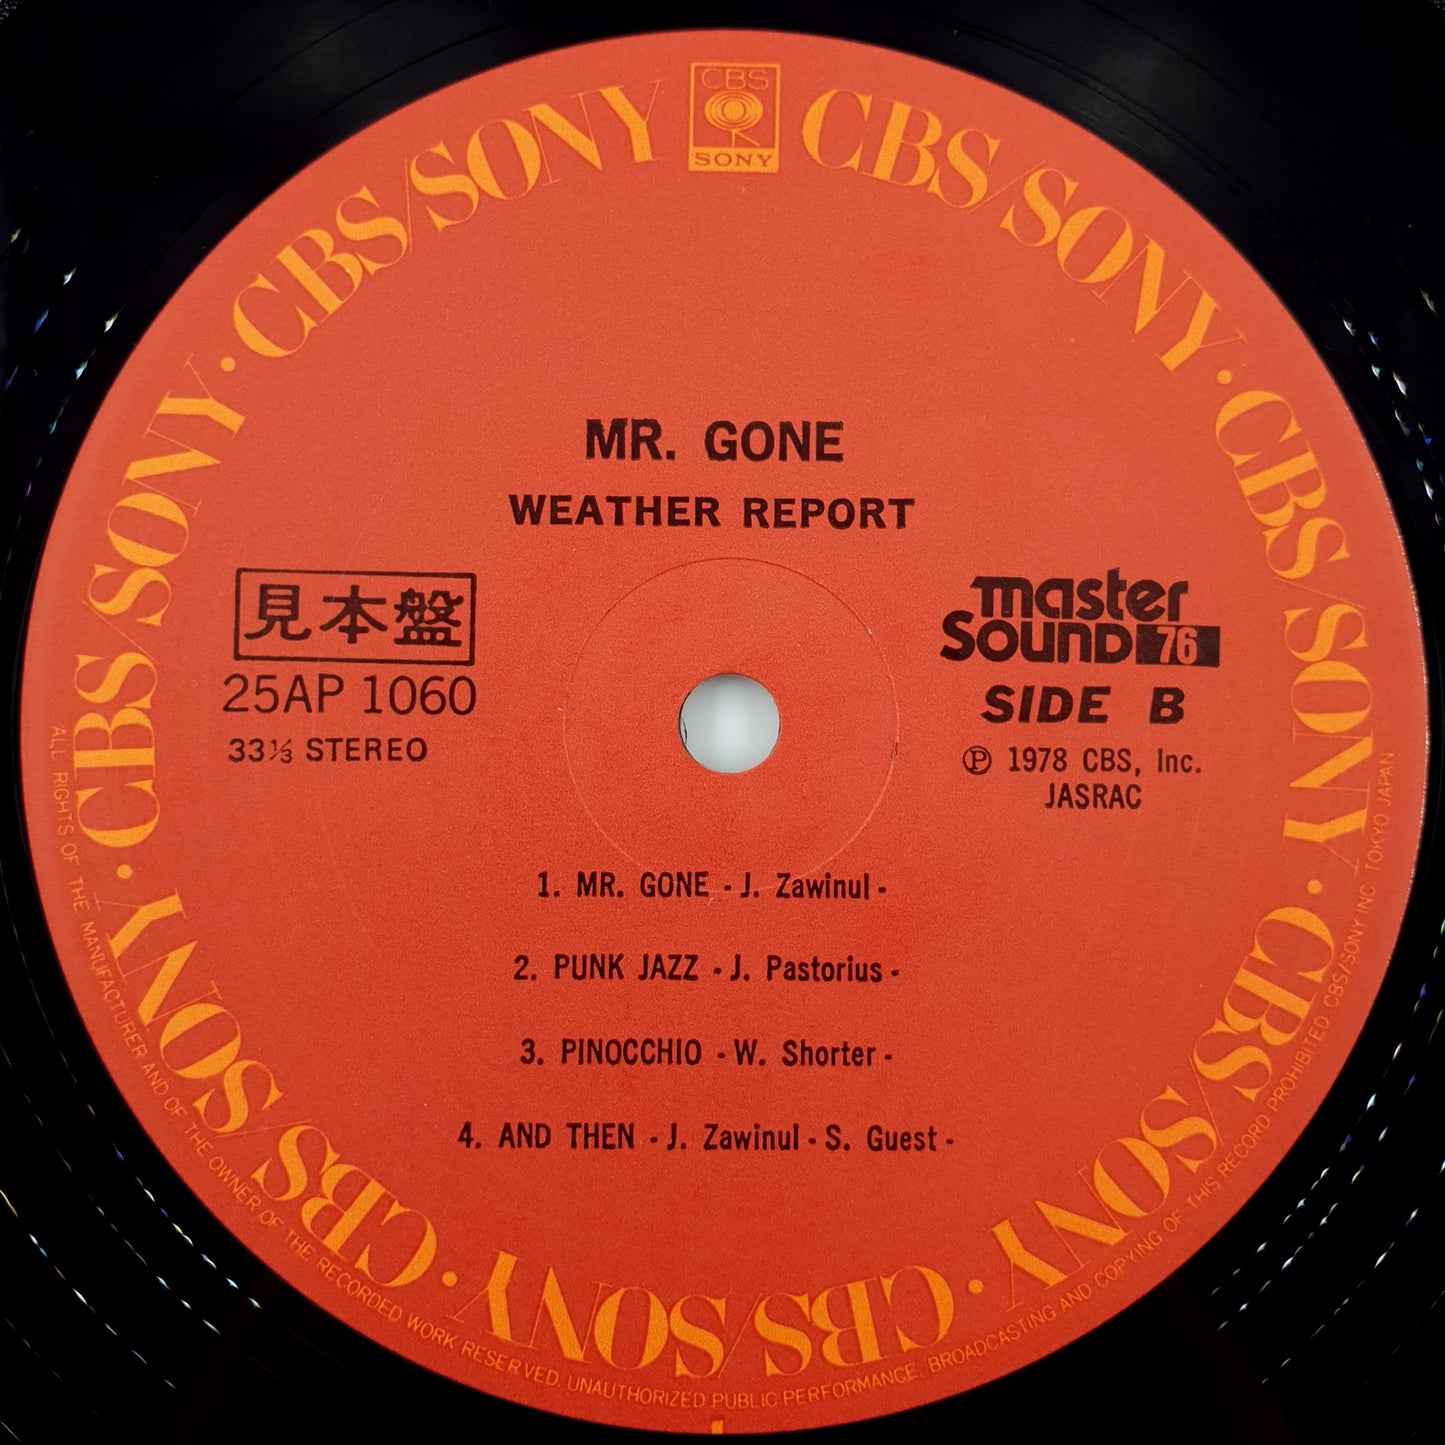 Weather Report – Mr. Gone